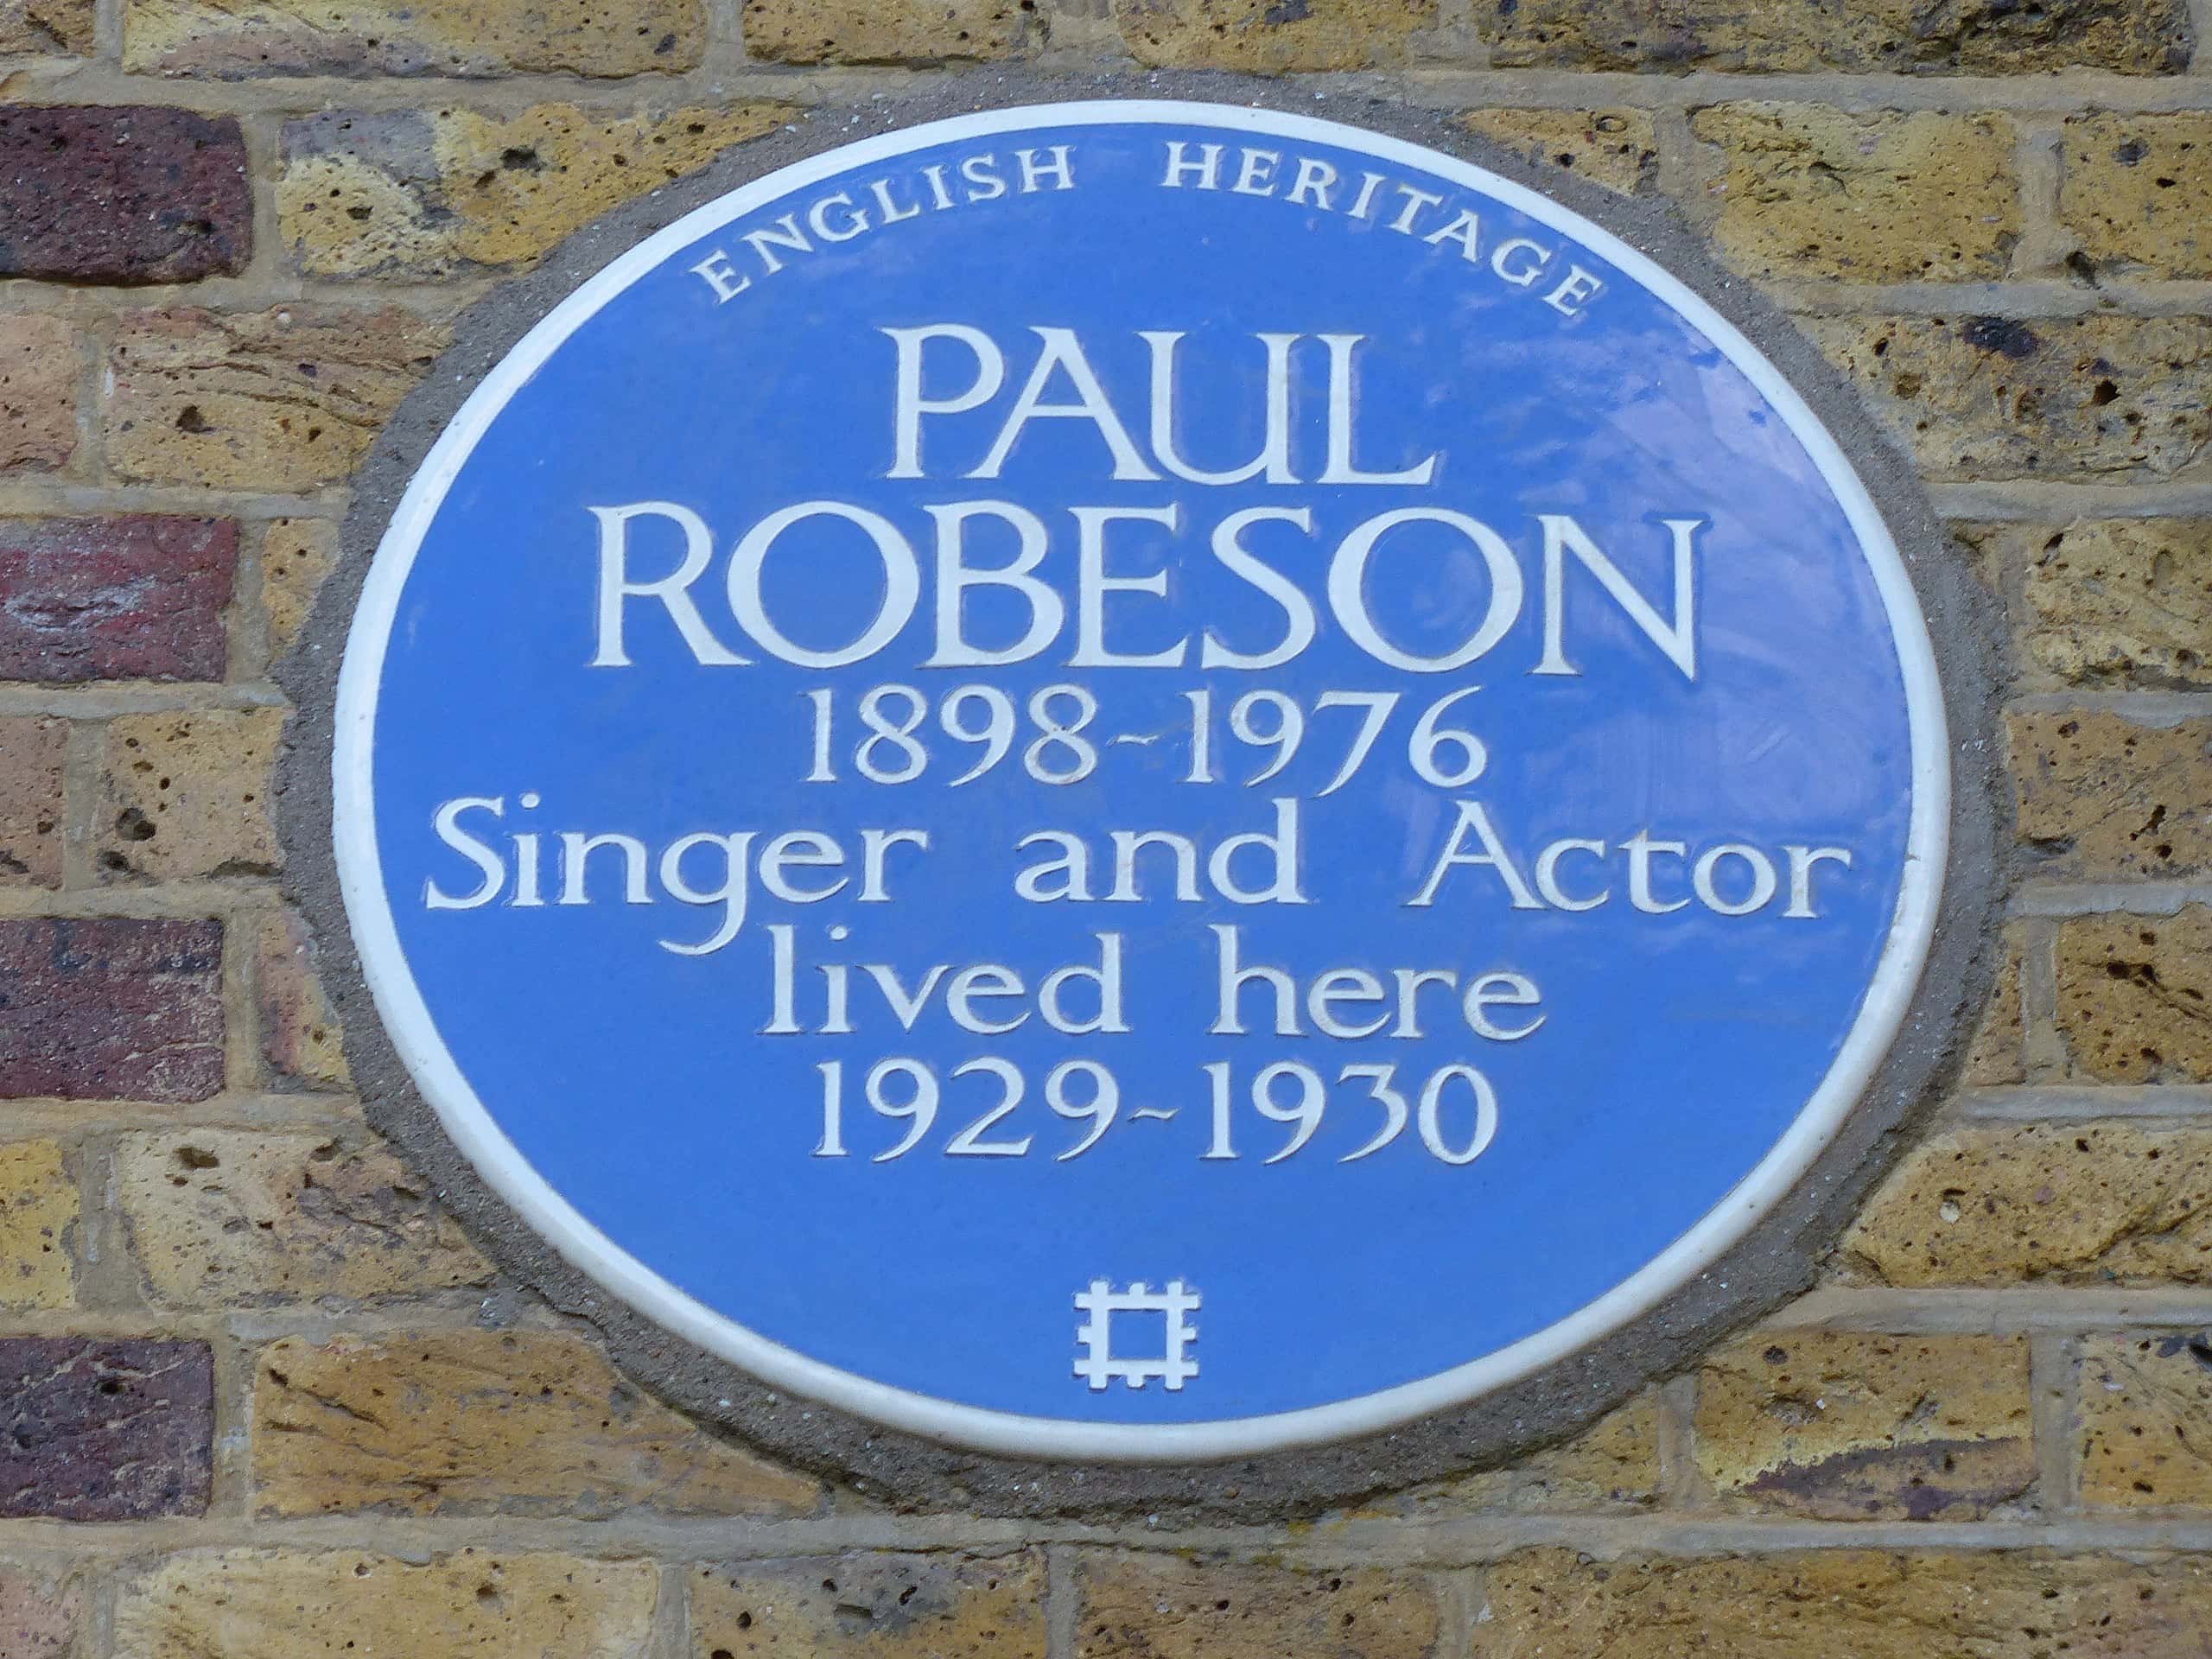 Paul Robeson facts